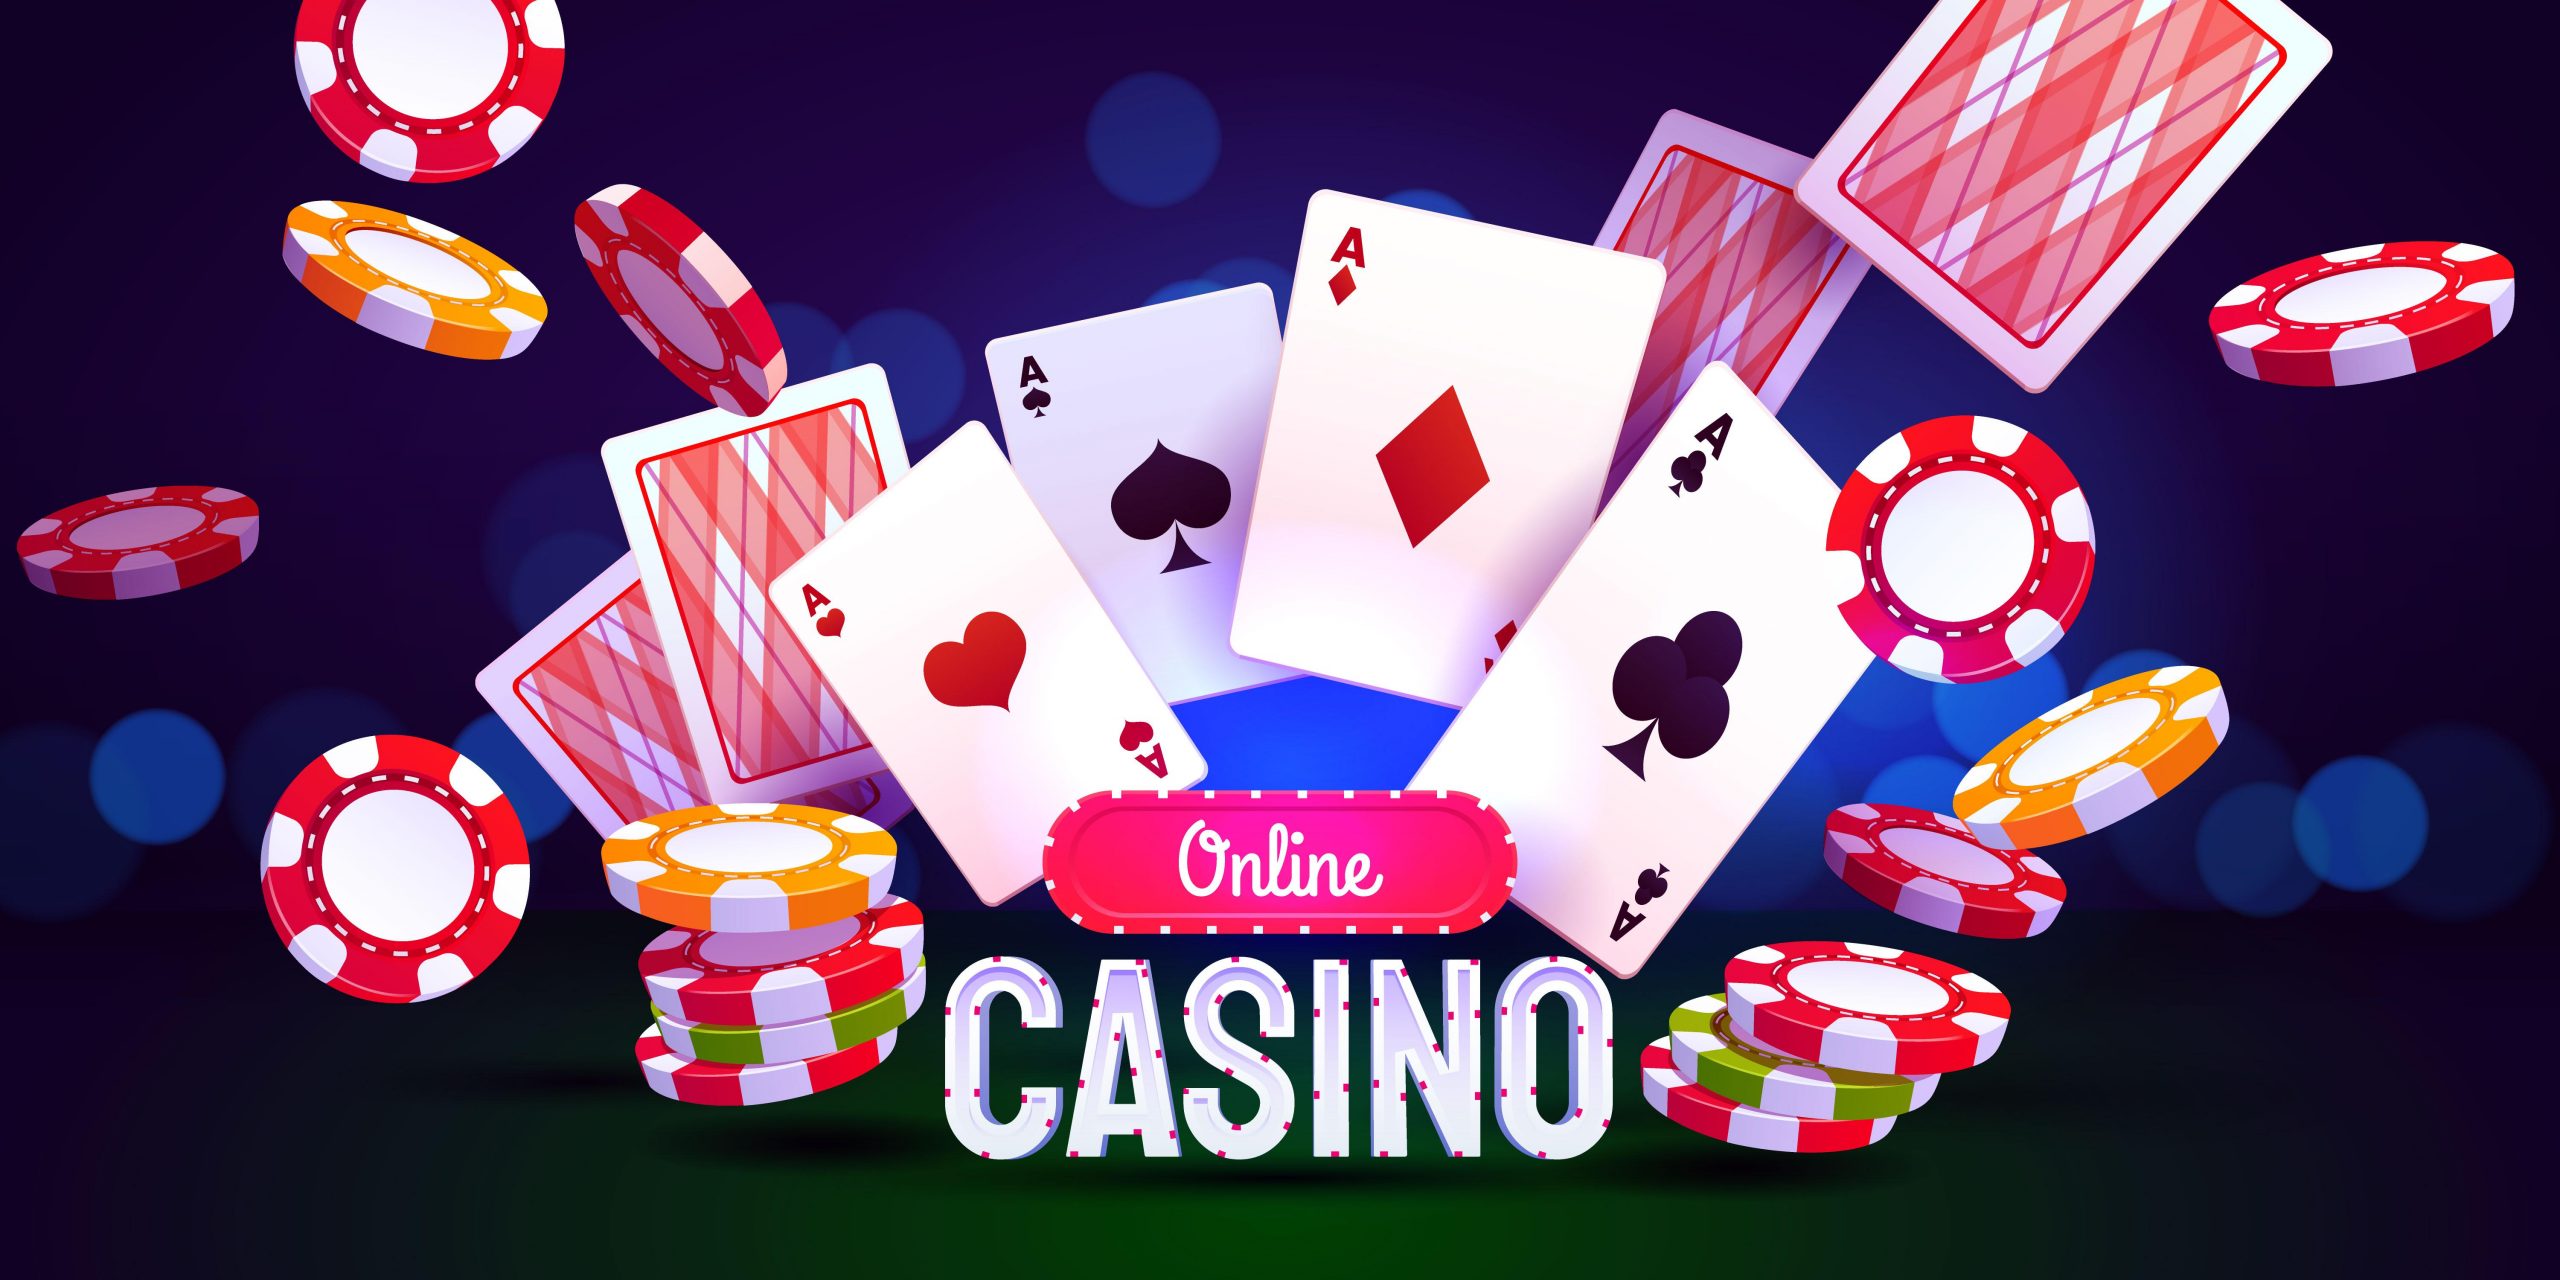 Learn about the benefits of free online casinos 2